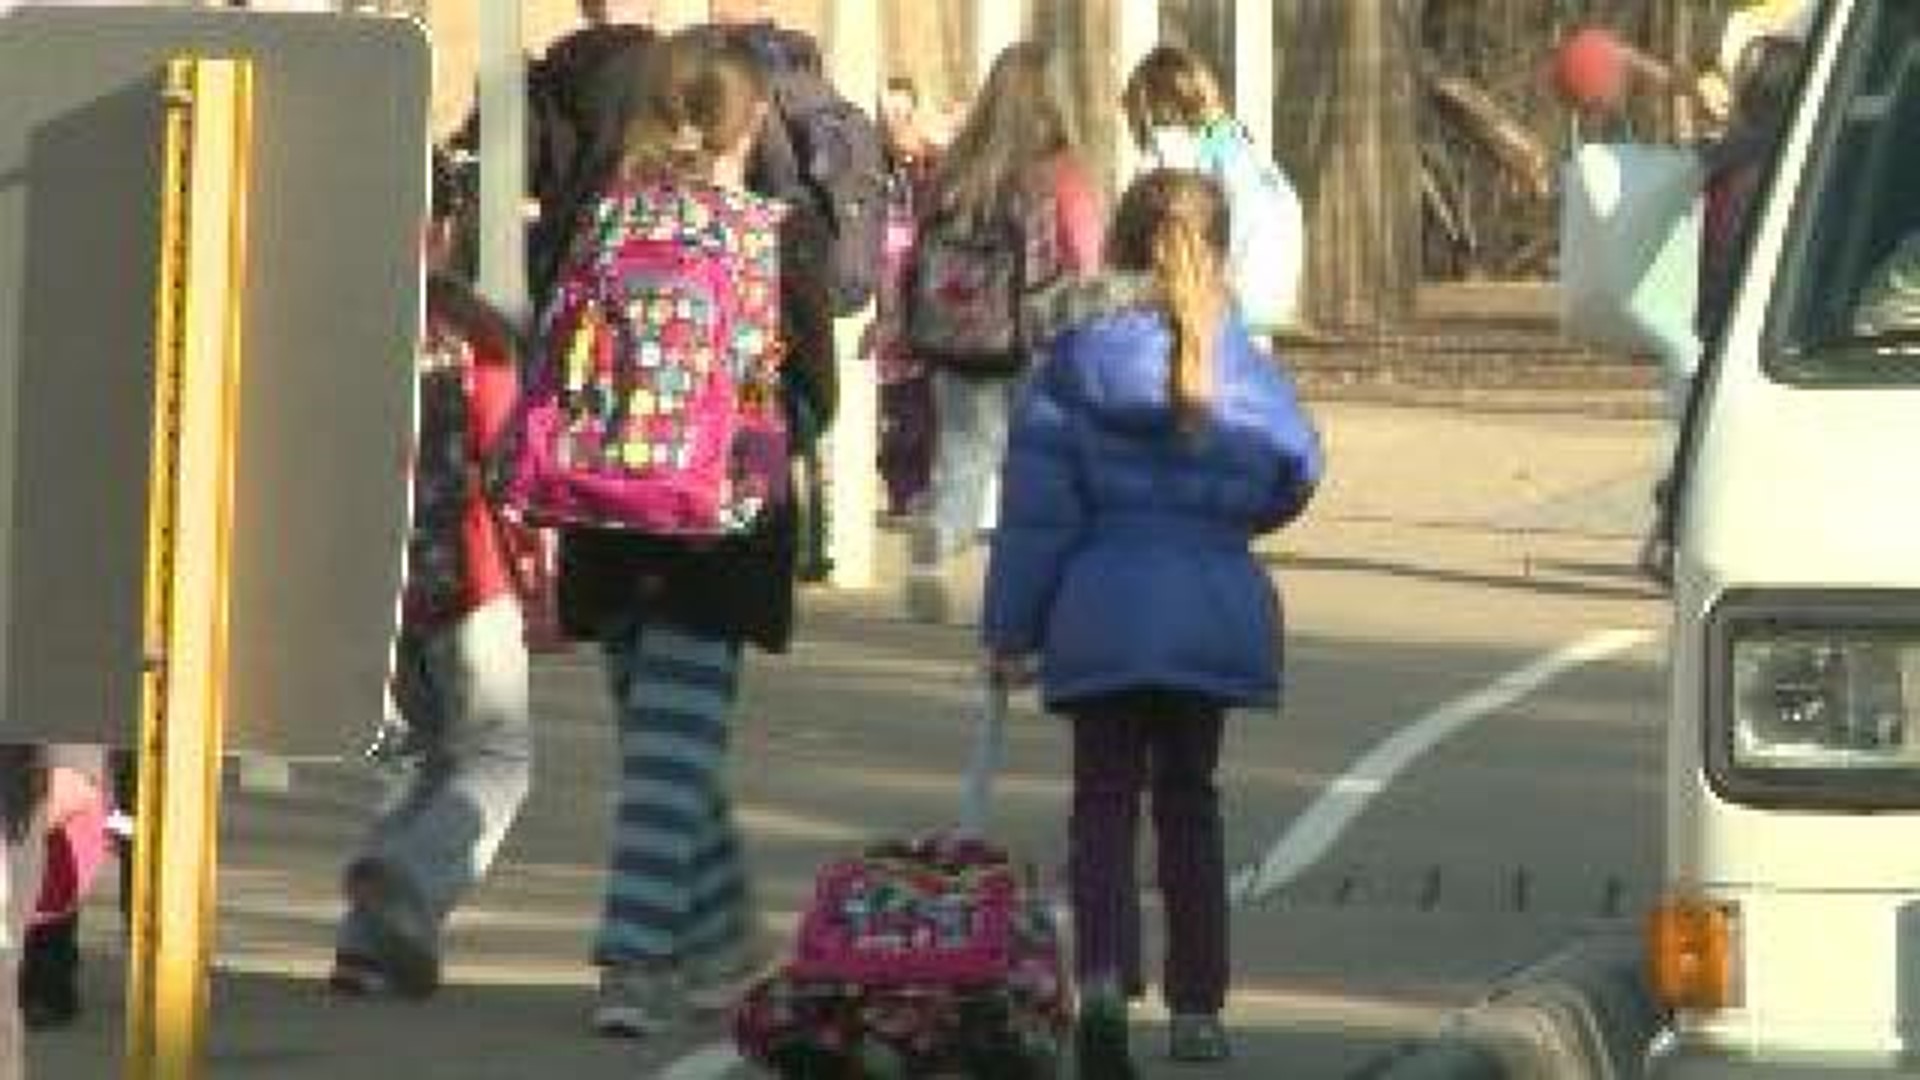 Safety Training Offered to School Officials